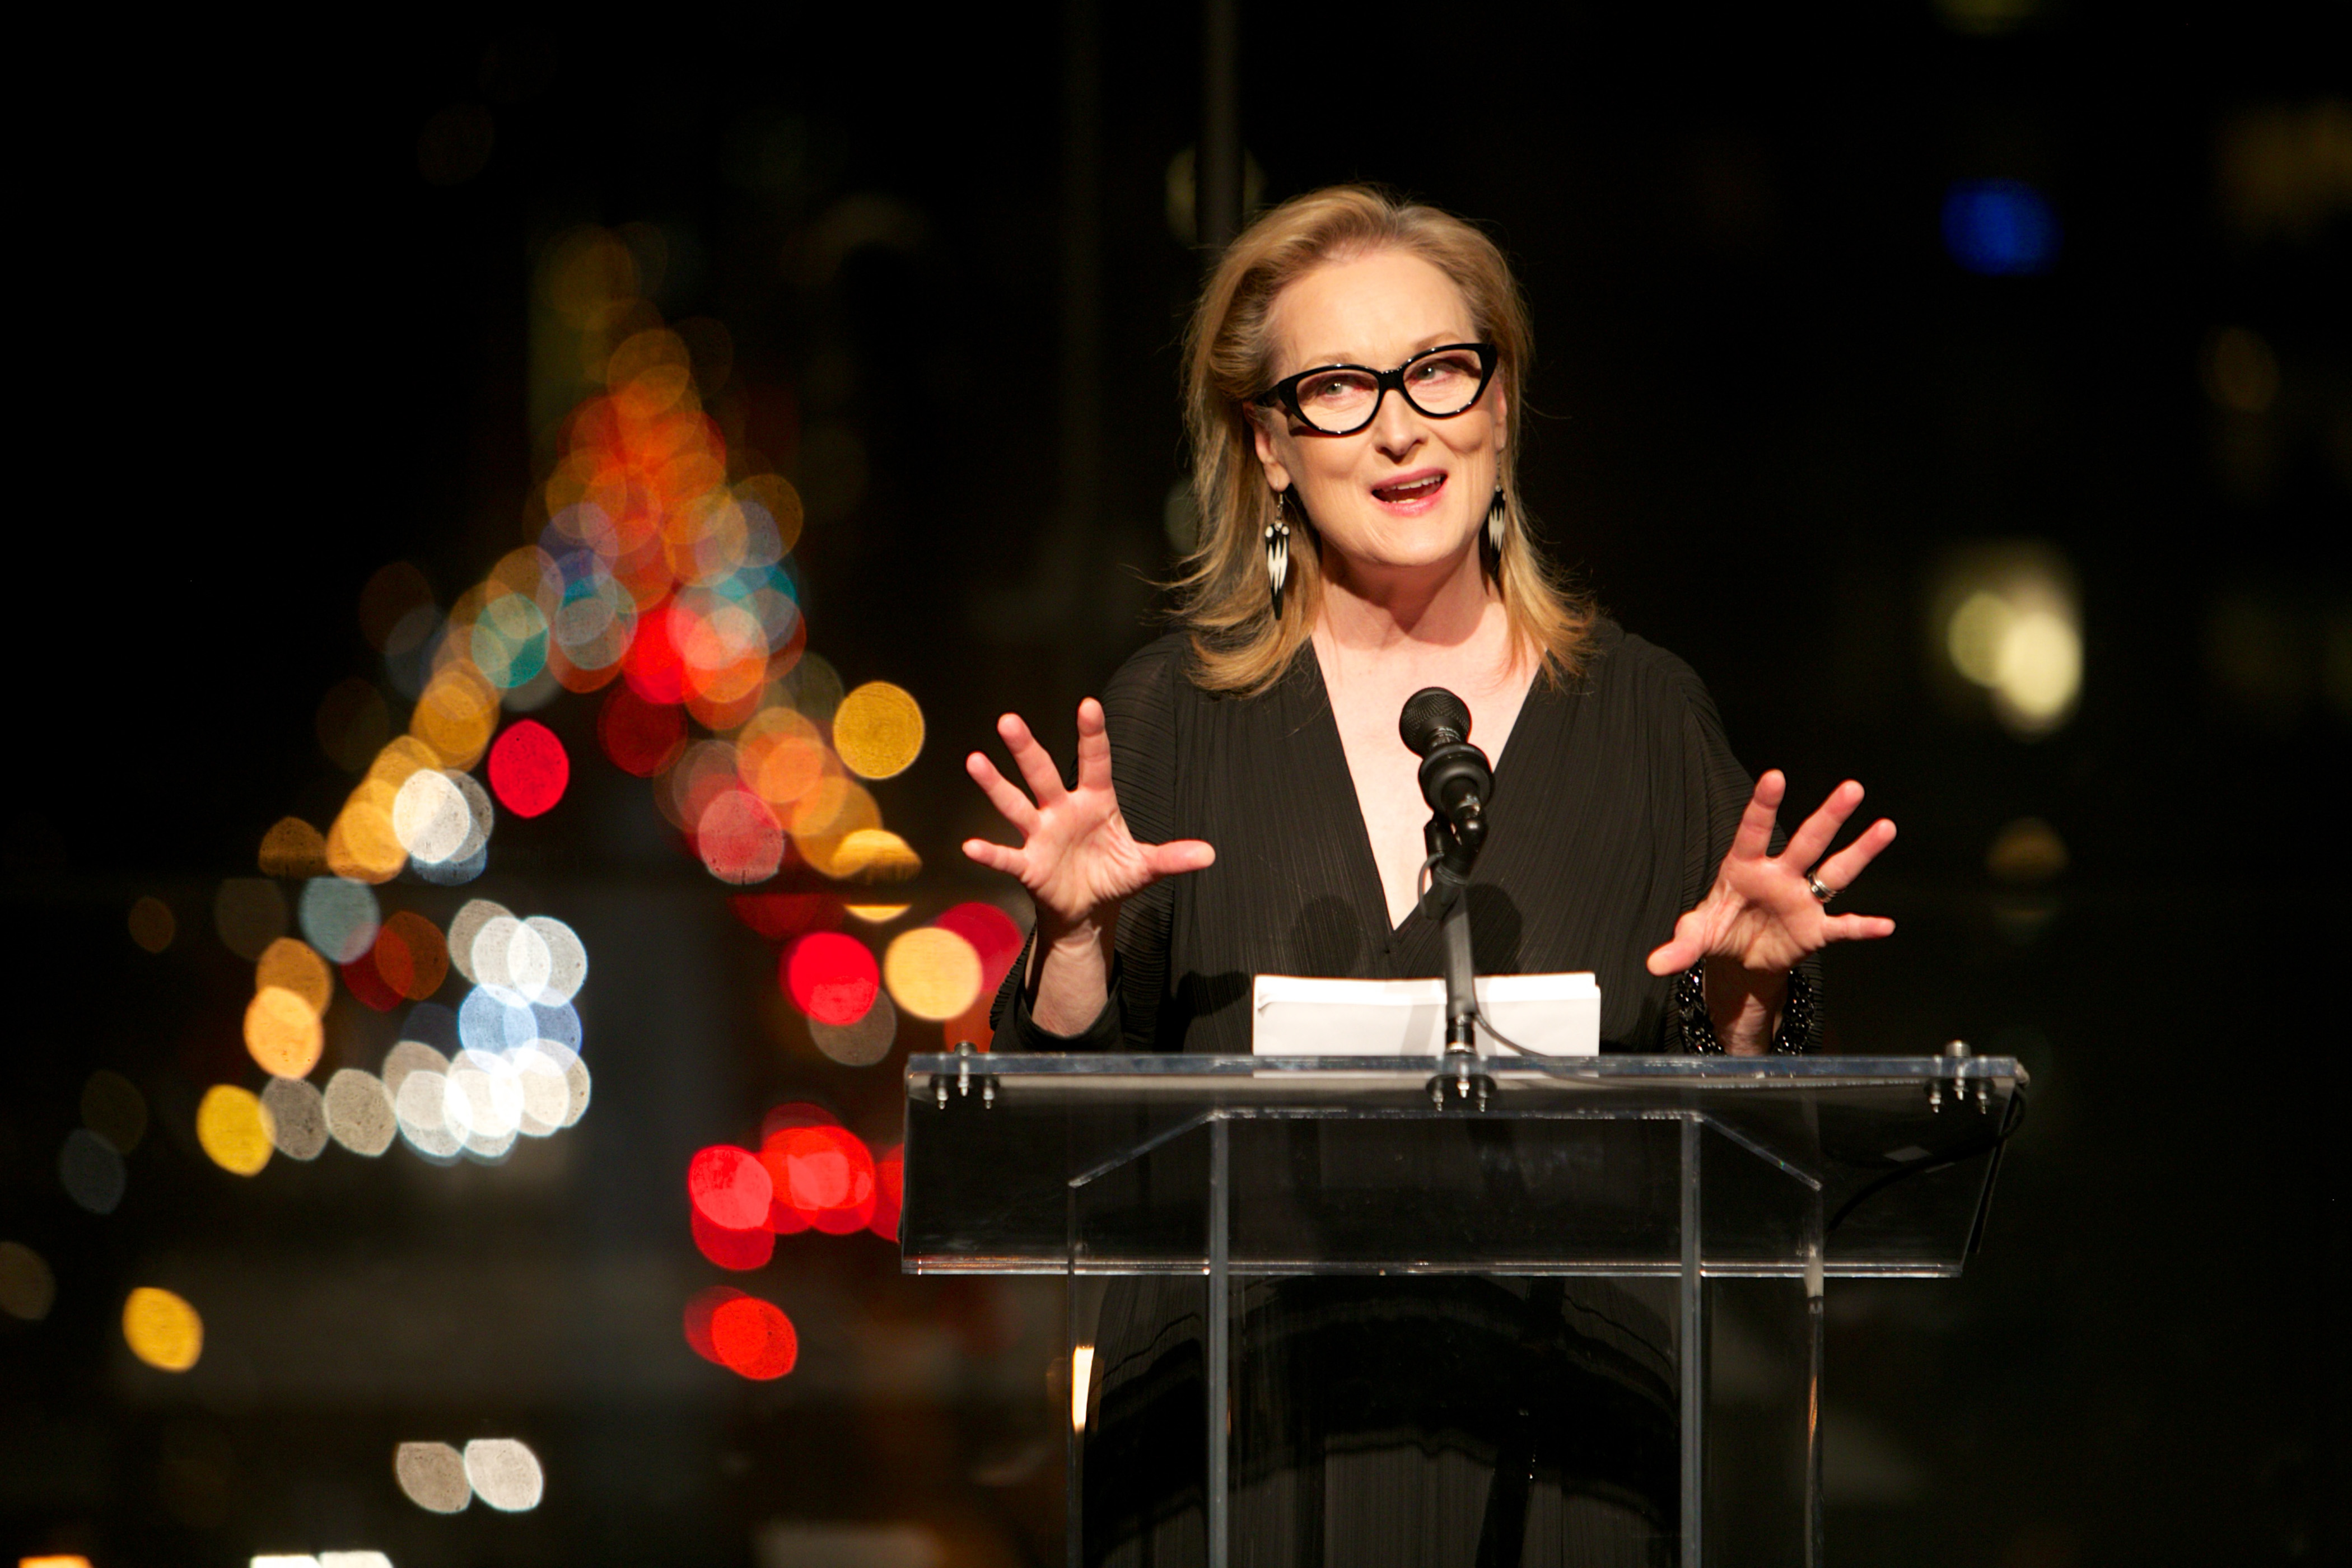 Meryl Streep ’71 will receive the AAVC Distinguished Award in spring 2022 and present a talk to the Vassar community as part of her campus visit.